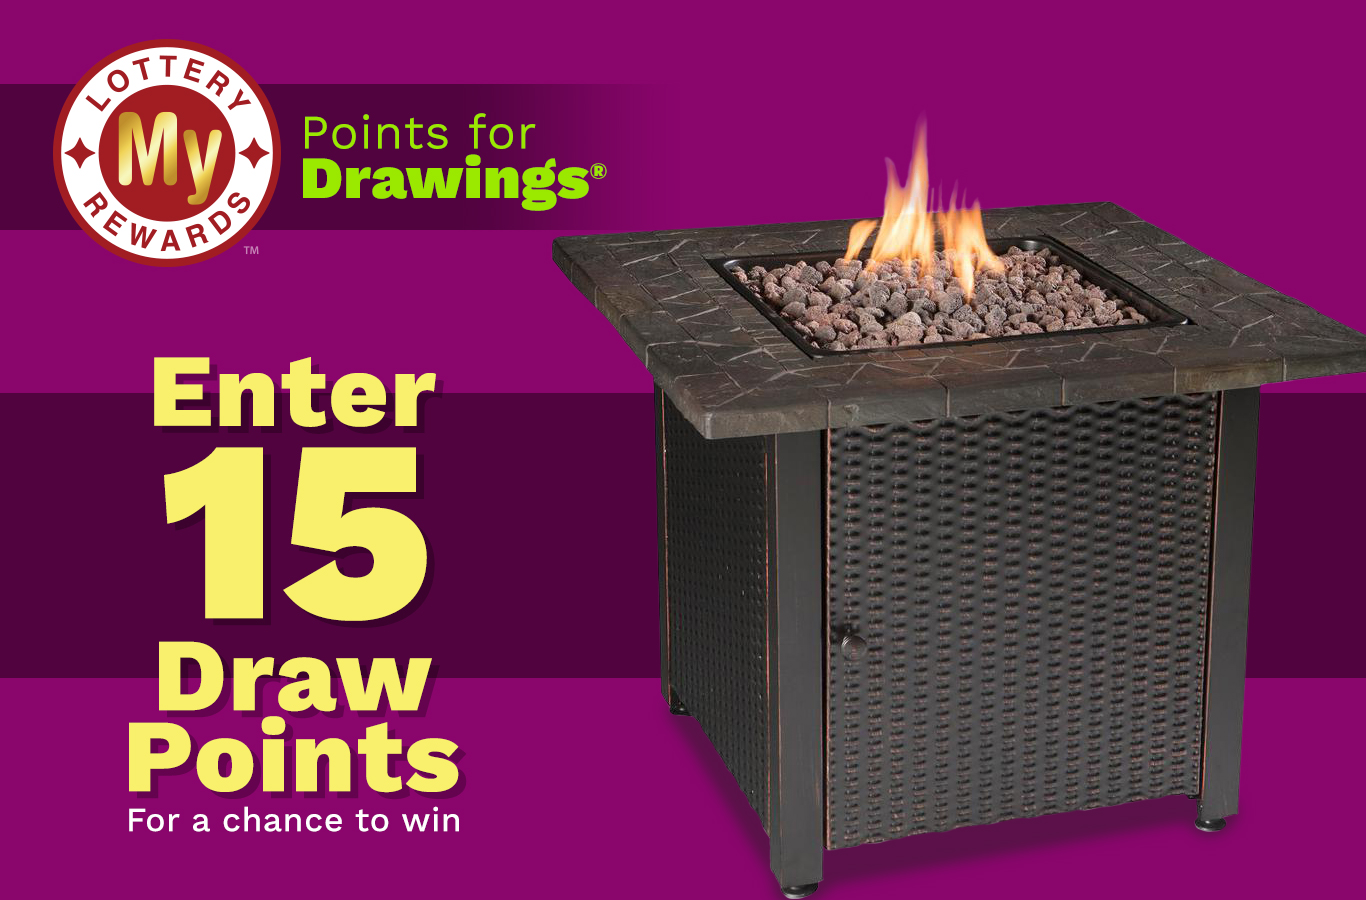 Here's your chance to win an Outdoor Fire Bowl! Enter by Sunday, June 5th.